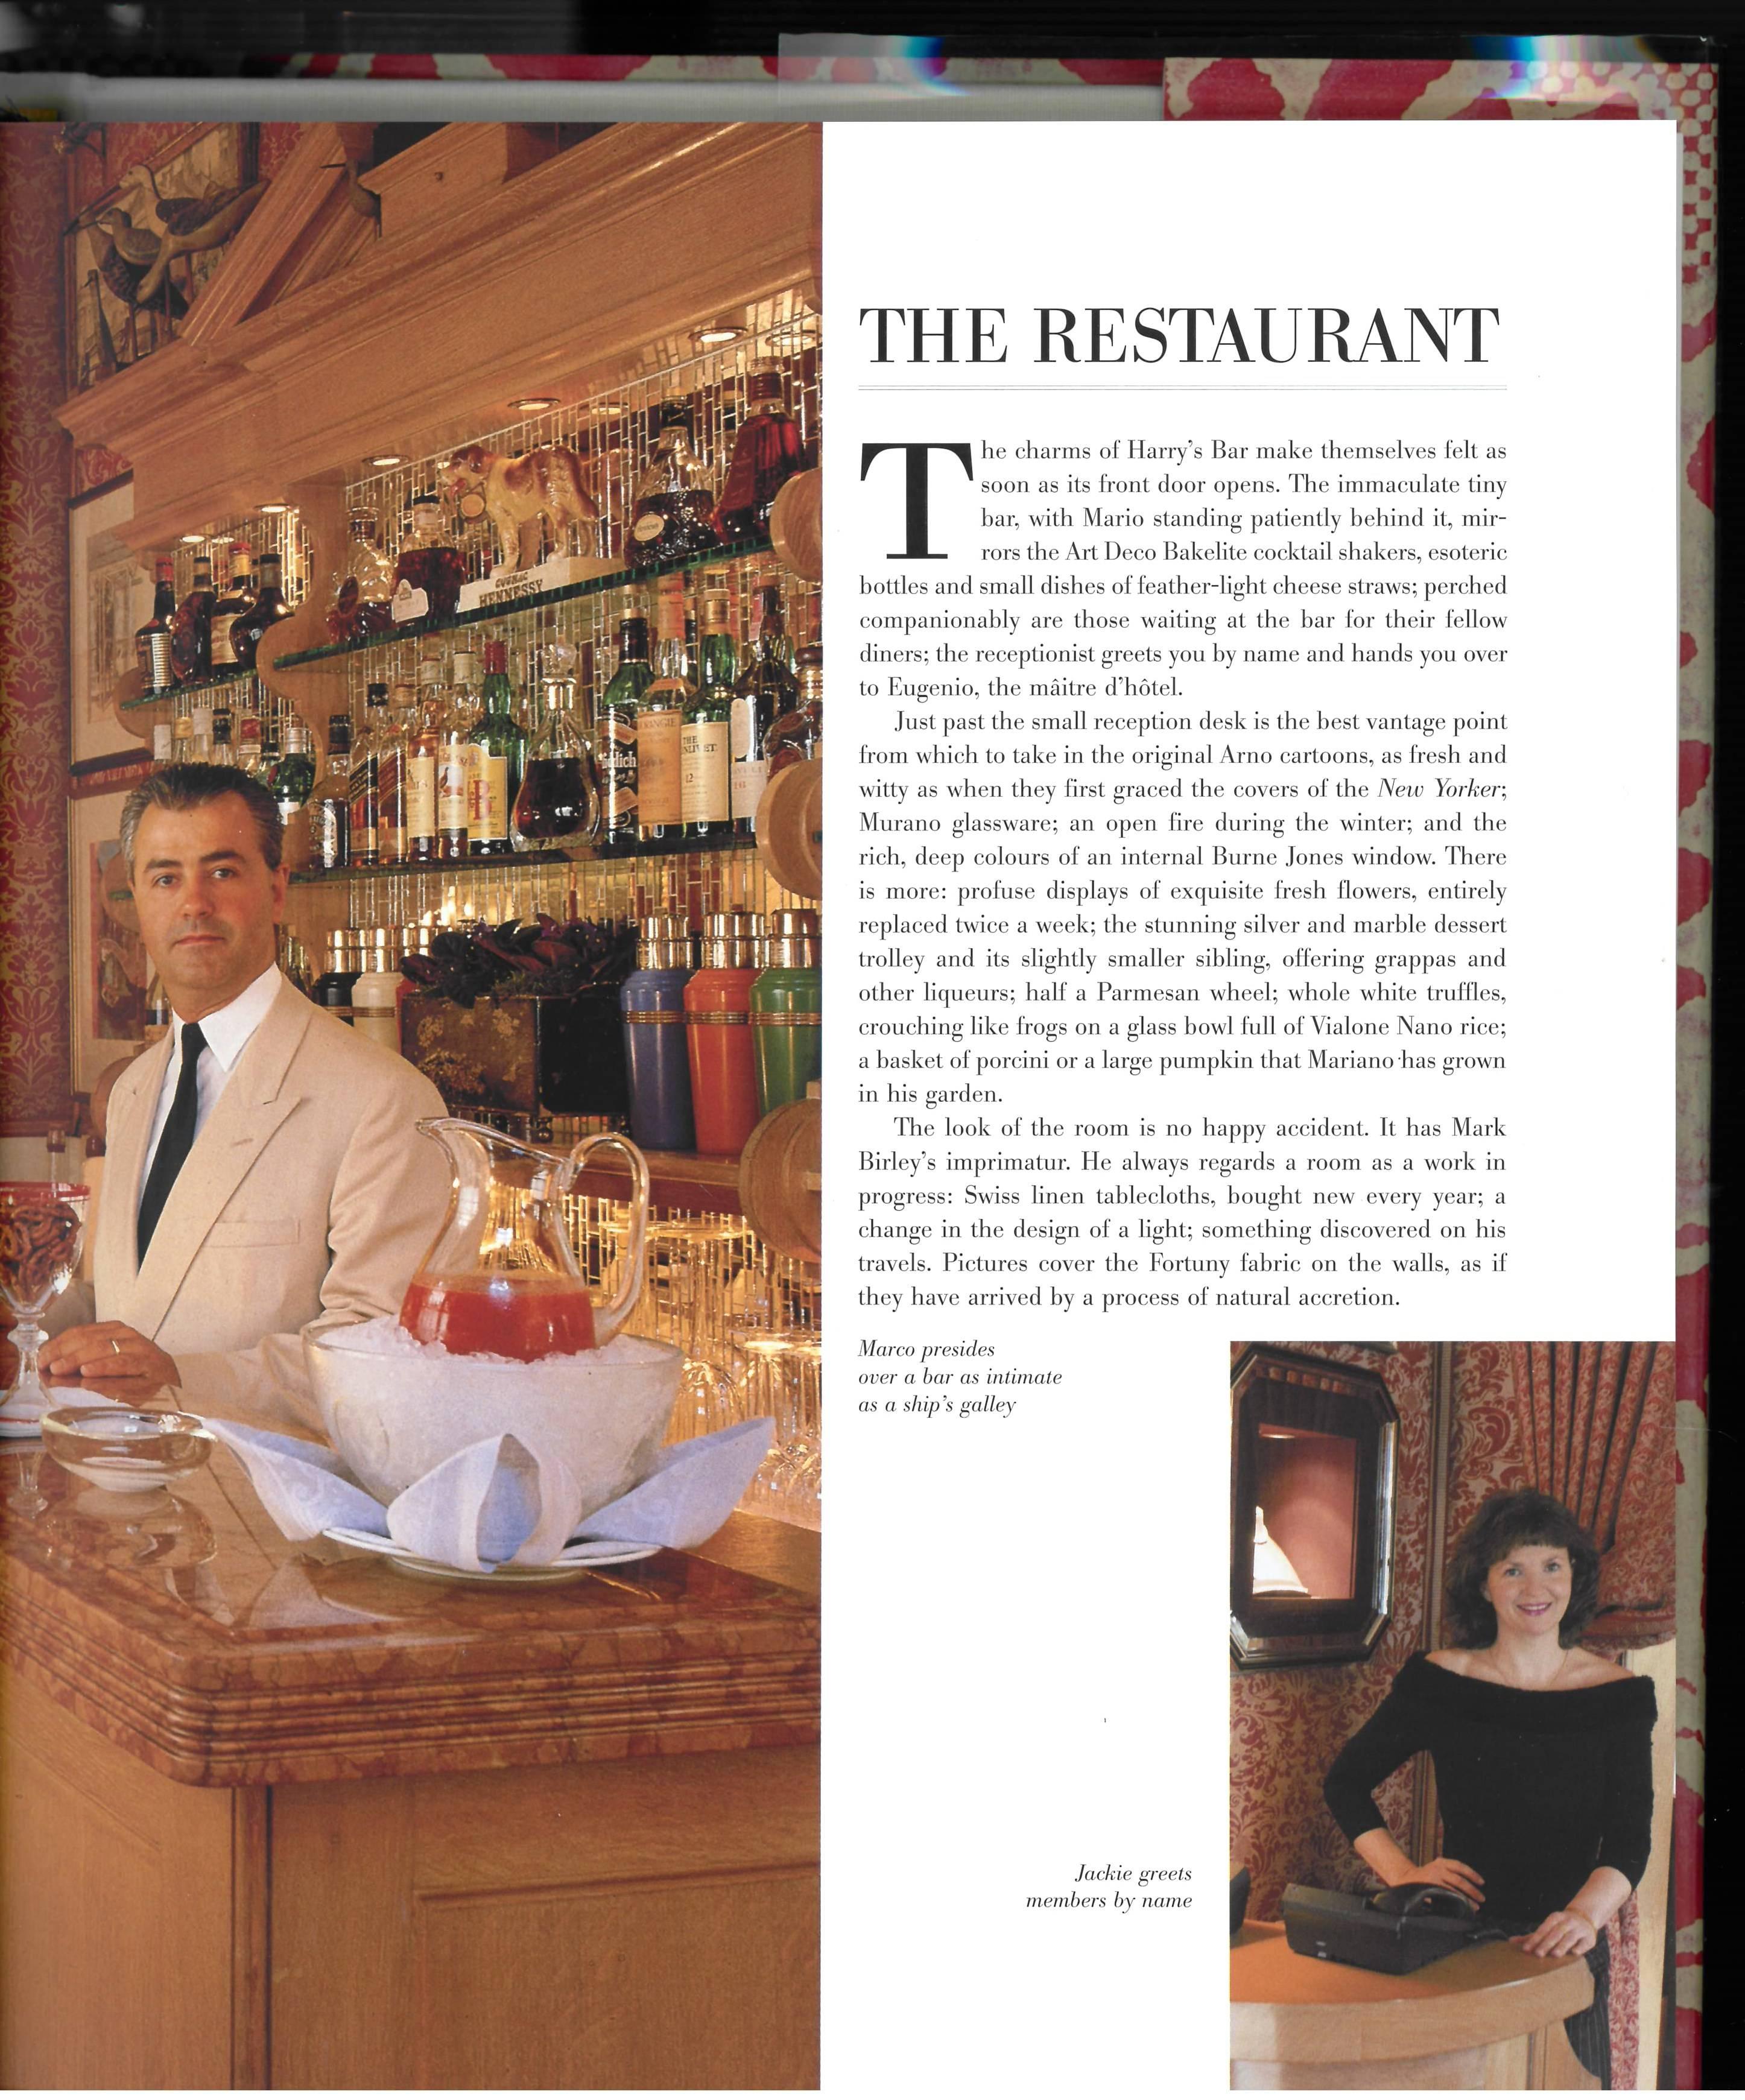 This is a very fine copy of this privately produced publication which was originally intended to be only for the members of the world famous London private dining club which was set up by Mark Birley. The book comes in the original presentation box